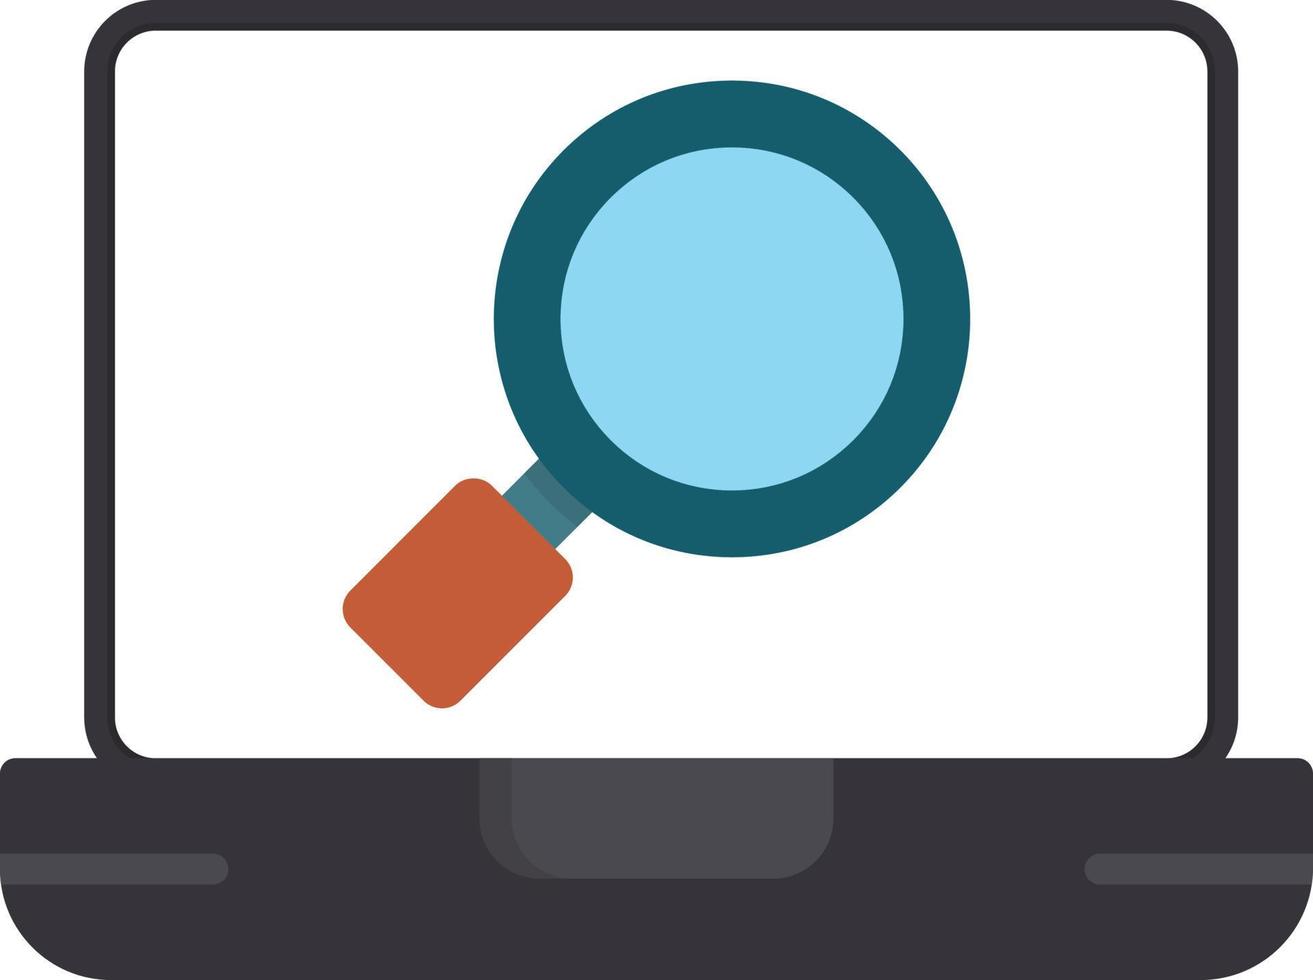 Search Flat Icon vector